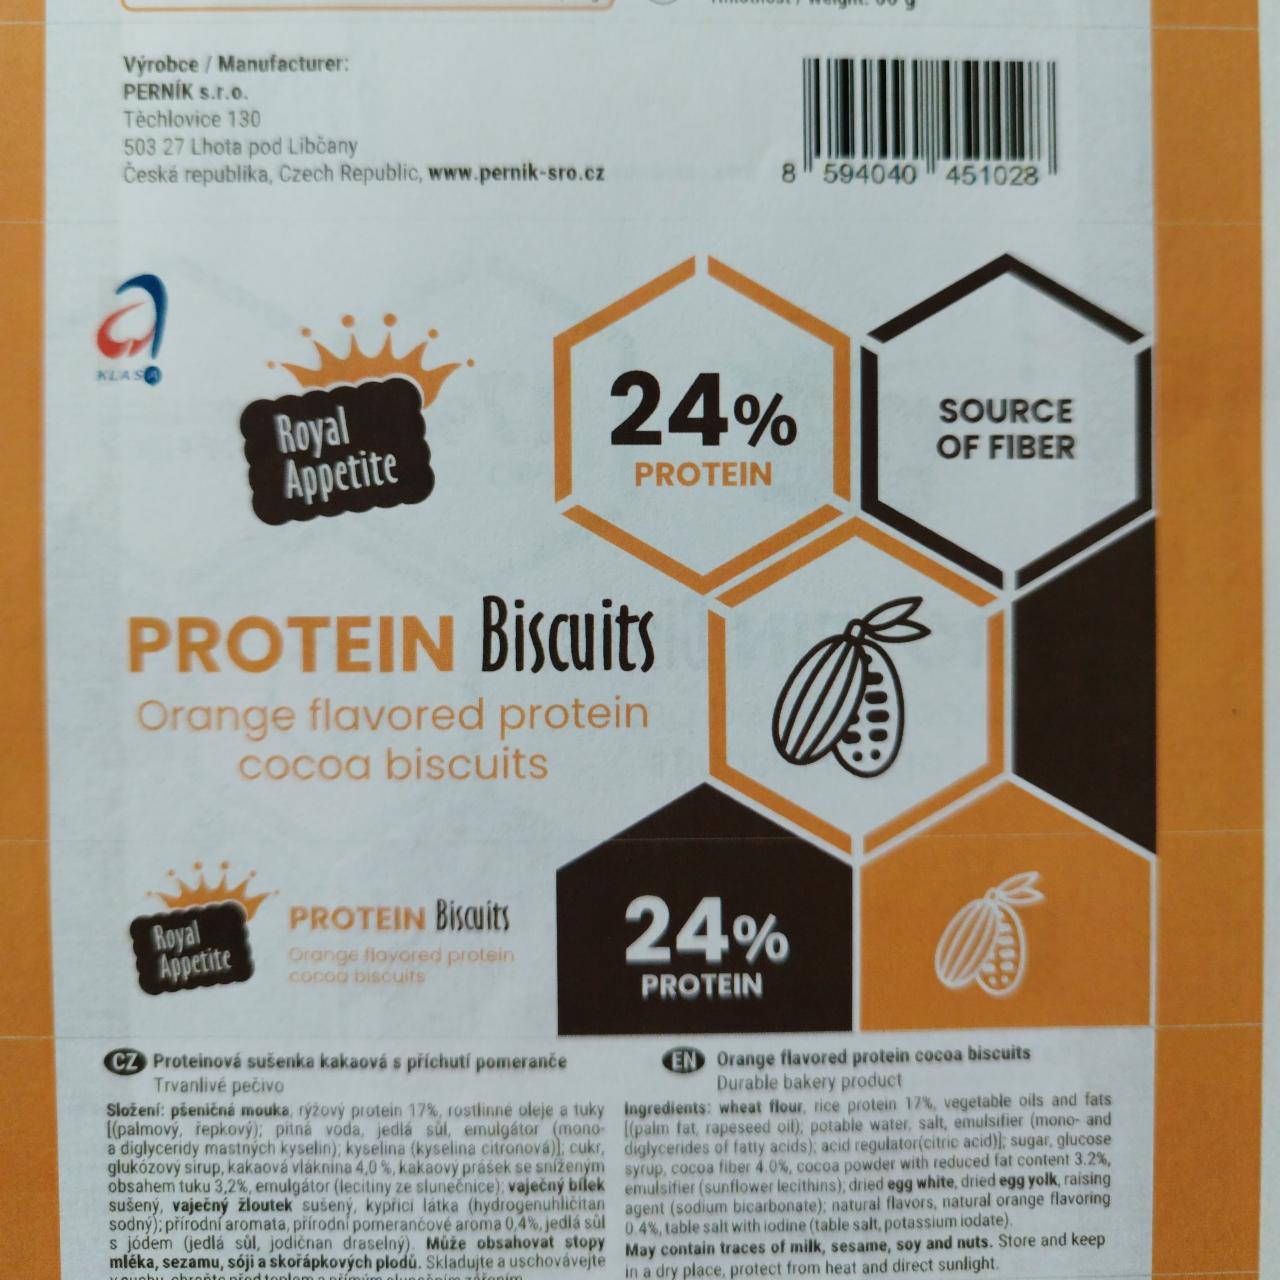 Fotografie - Protein biscuits Orange flavored protein cocoa biscuits Royal Appetite